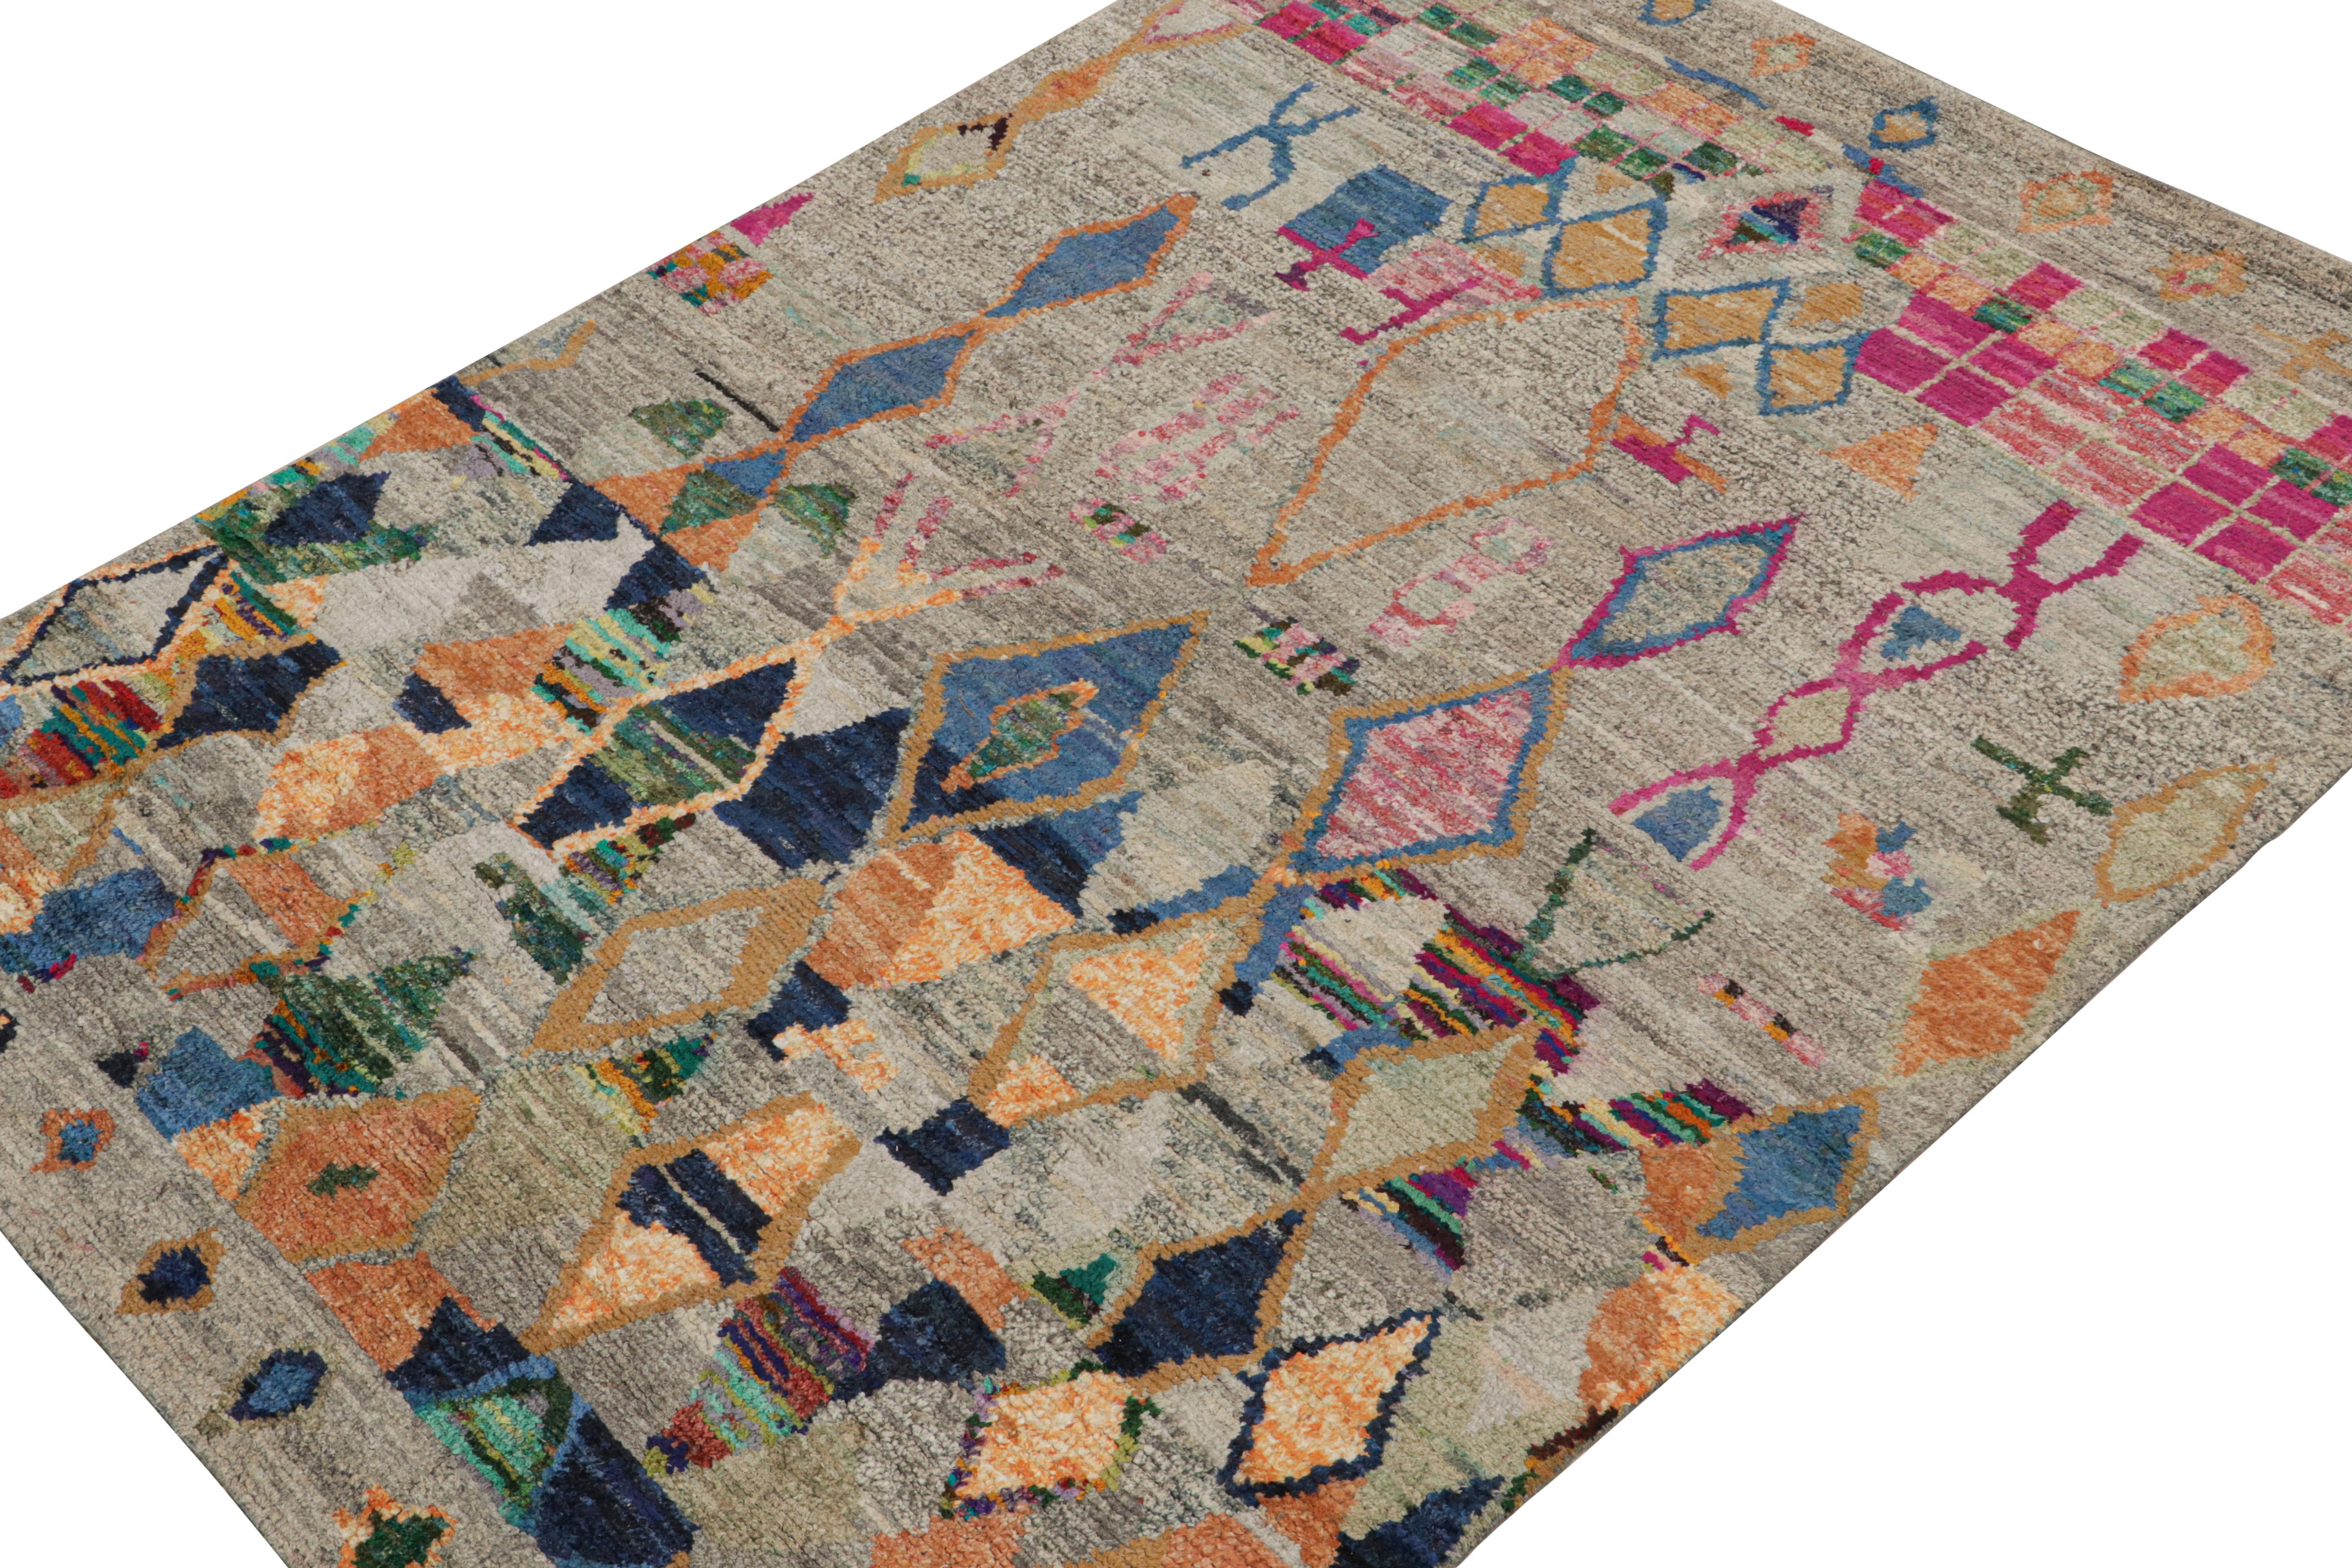 Hand-knotted in wool, silk & cotton, this 6x8 custom rug is a new addition to the Moroccan Collection by Rug & Kilim. 

On the Design

This rug enjoys primitivist style with patterns in tones of gray, blue, pink & gold. Connoisseurs will admire this